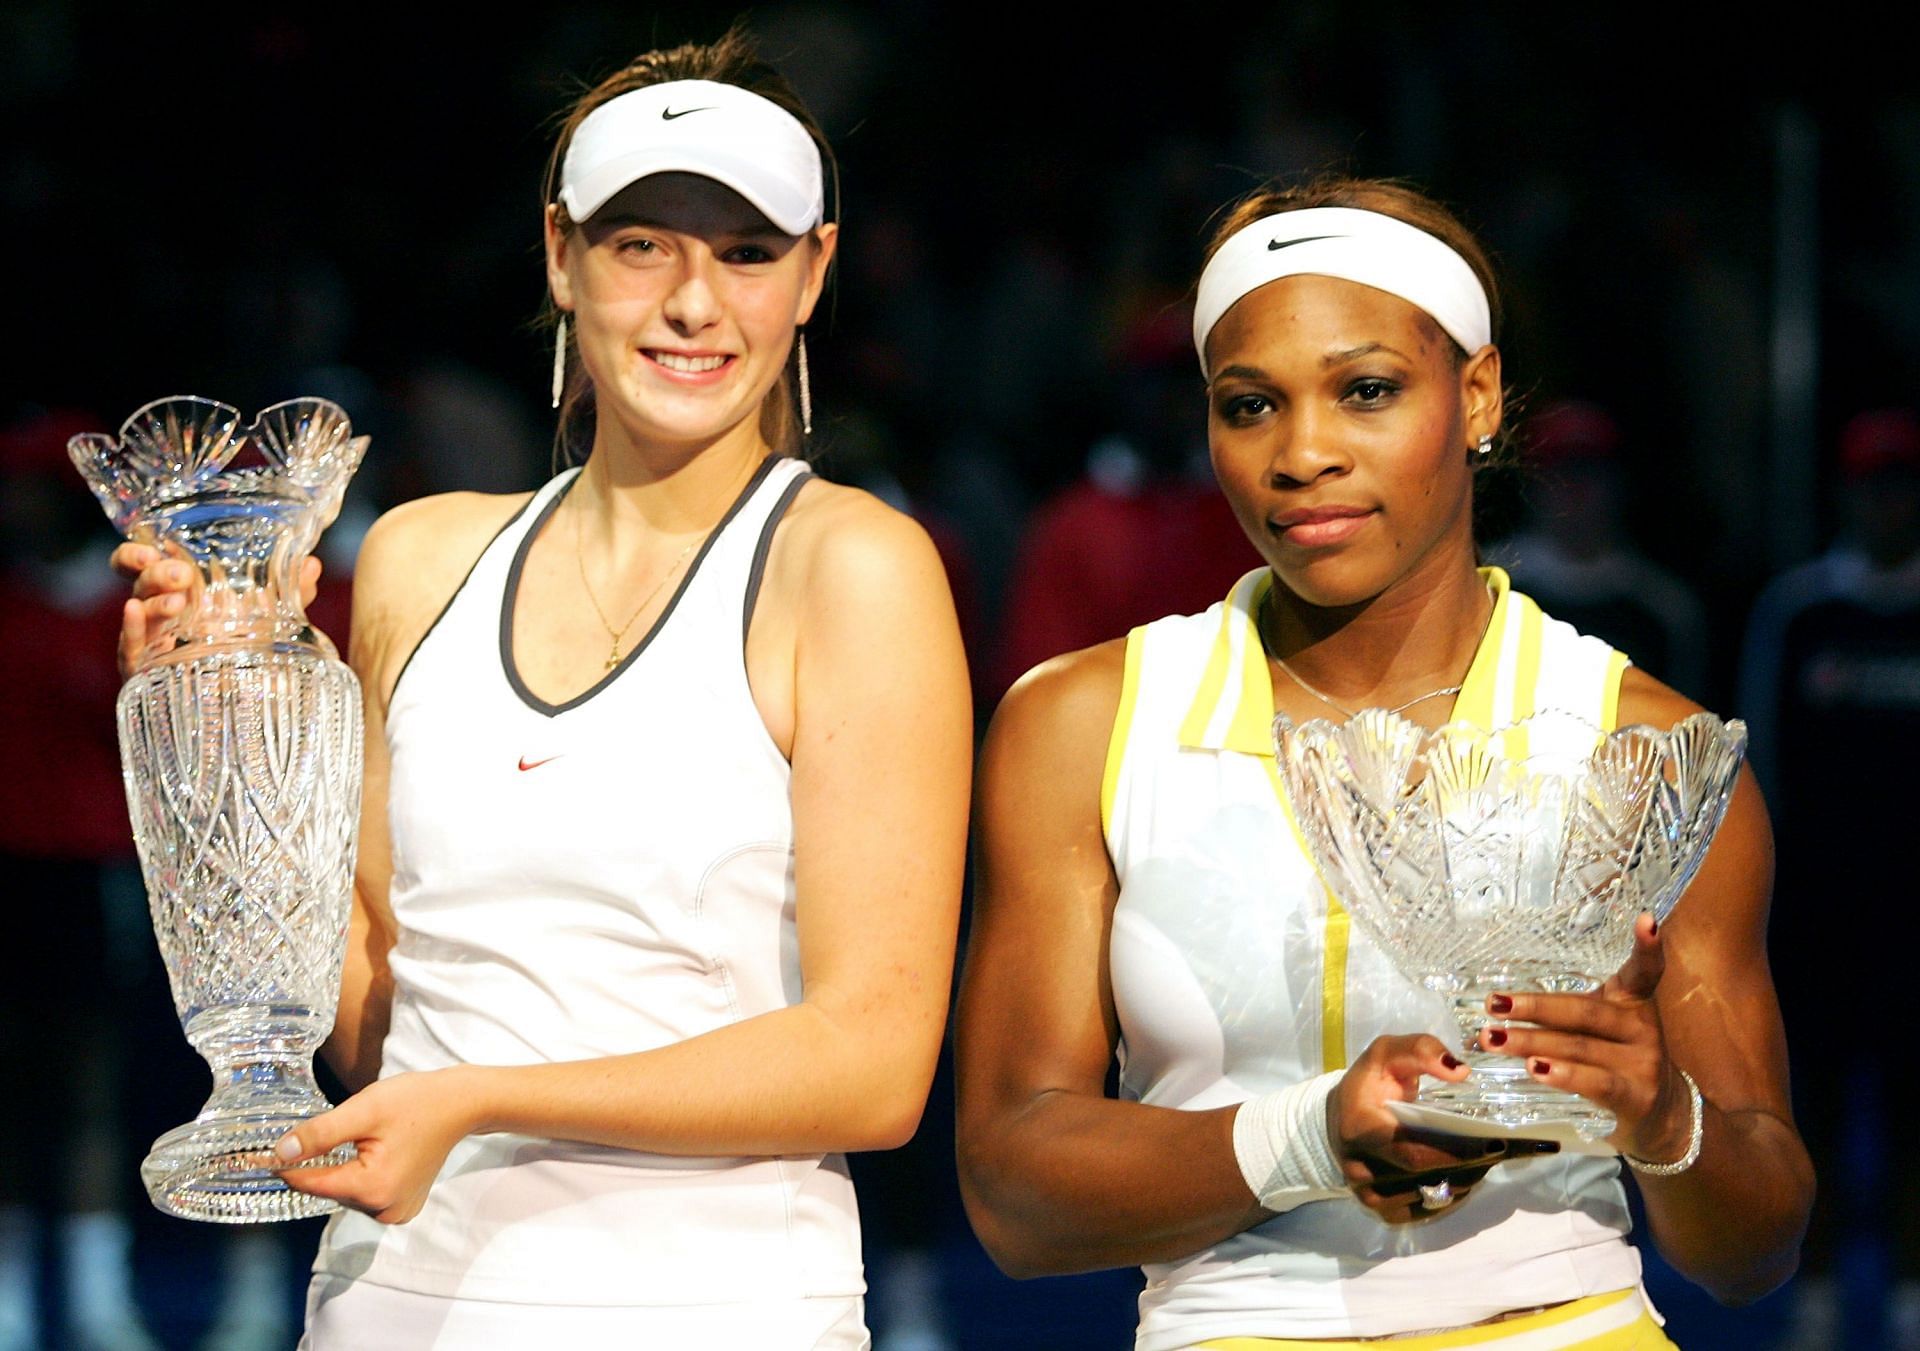 Williams went through 2004 without winning a Grand Slam title